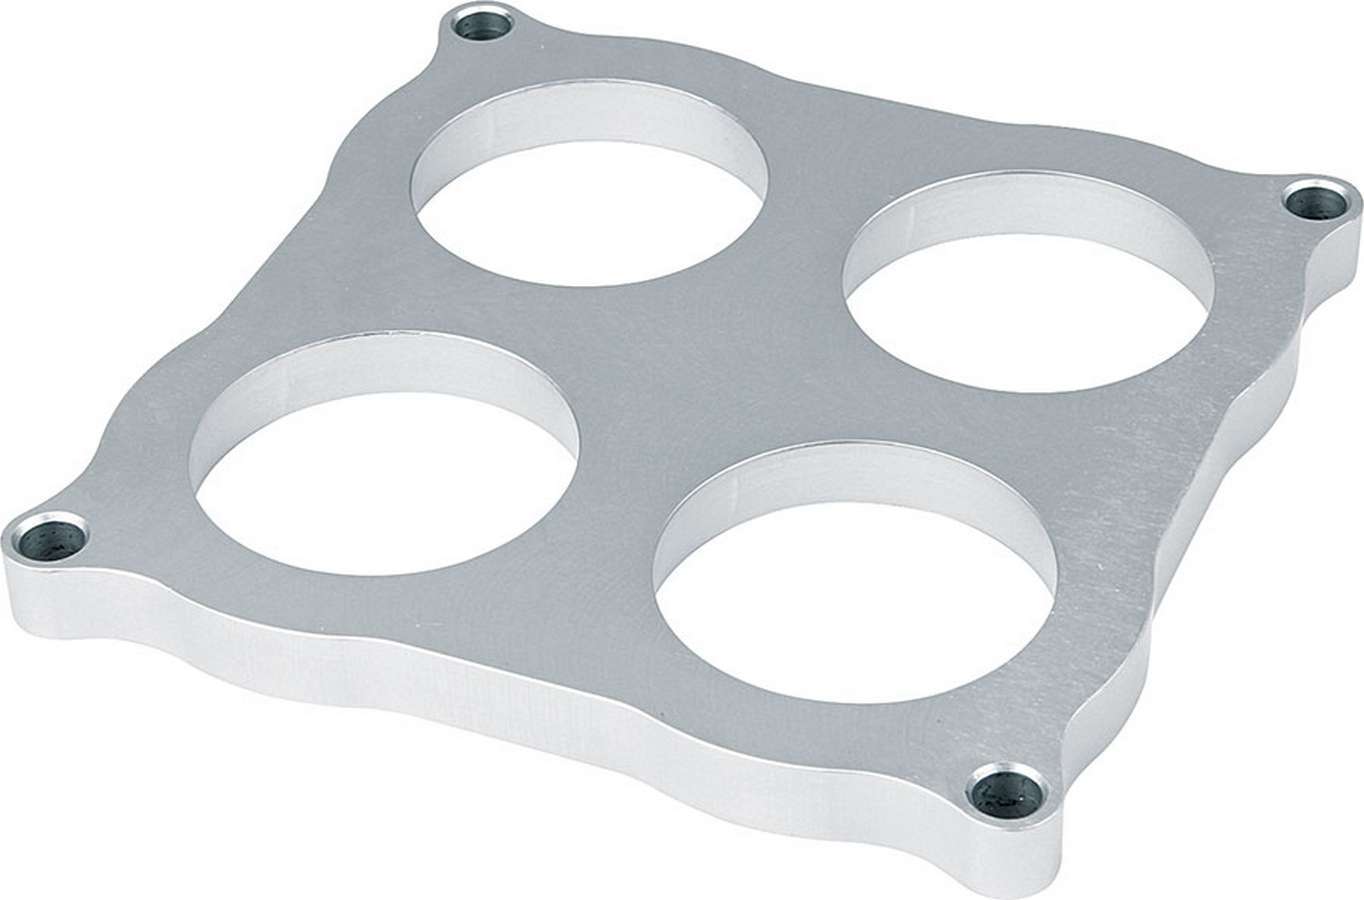 Allstar Performance 25972 Carburetor Shear Plate, 1/2 in Thick, 2 in Bores, Dominator Flange, Aluminum, Each